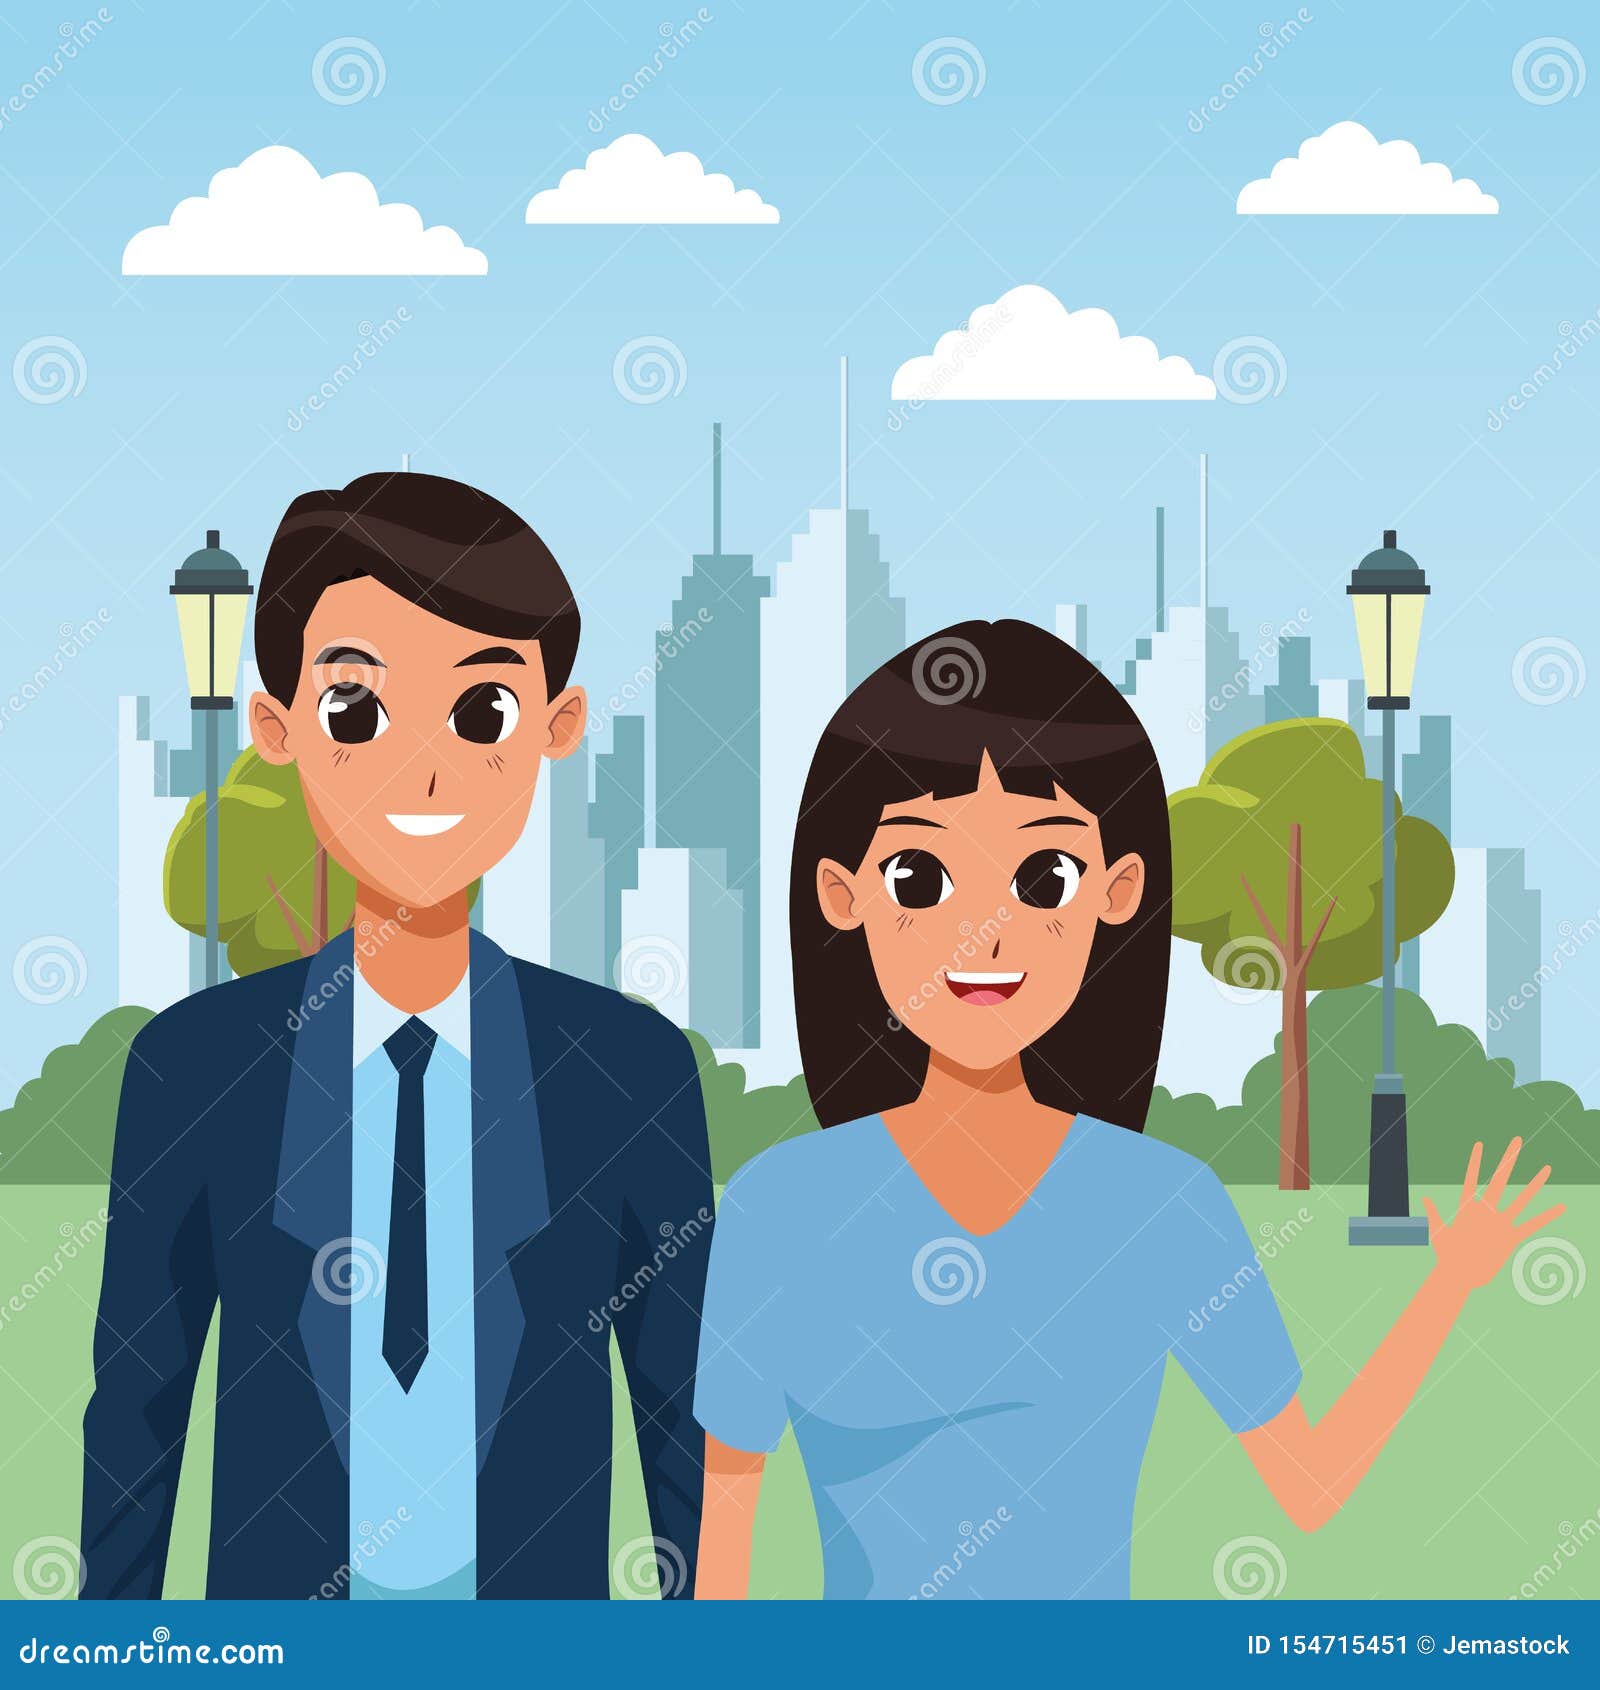 Young Couple Smiling and Greeting Stock Vector - Illustration of avatar ...